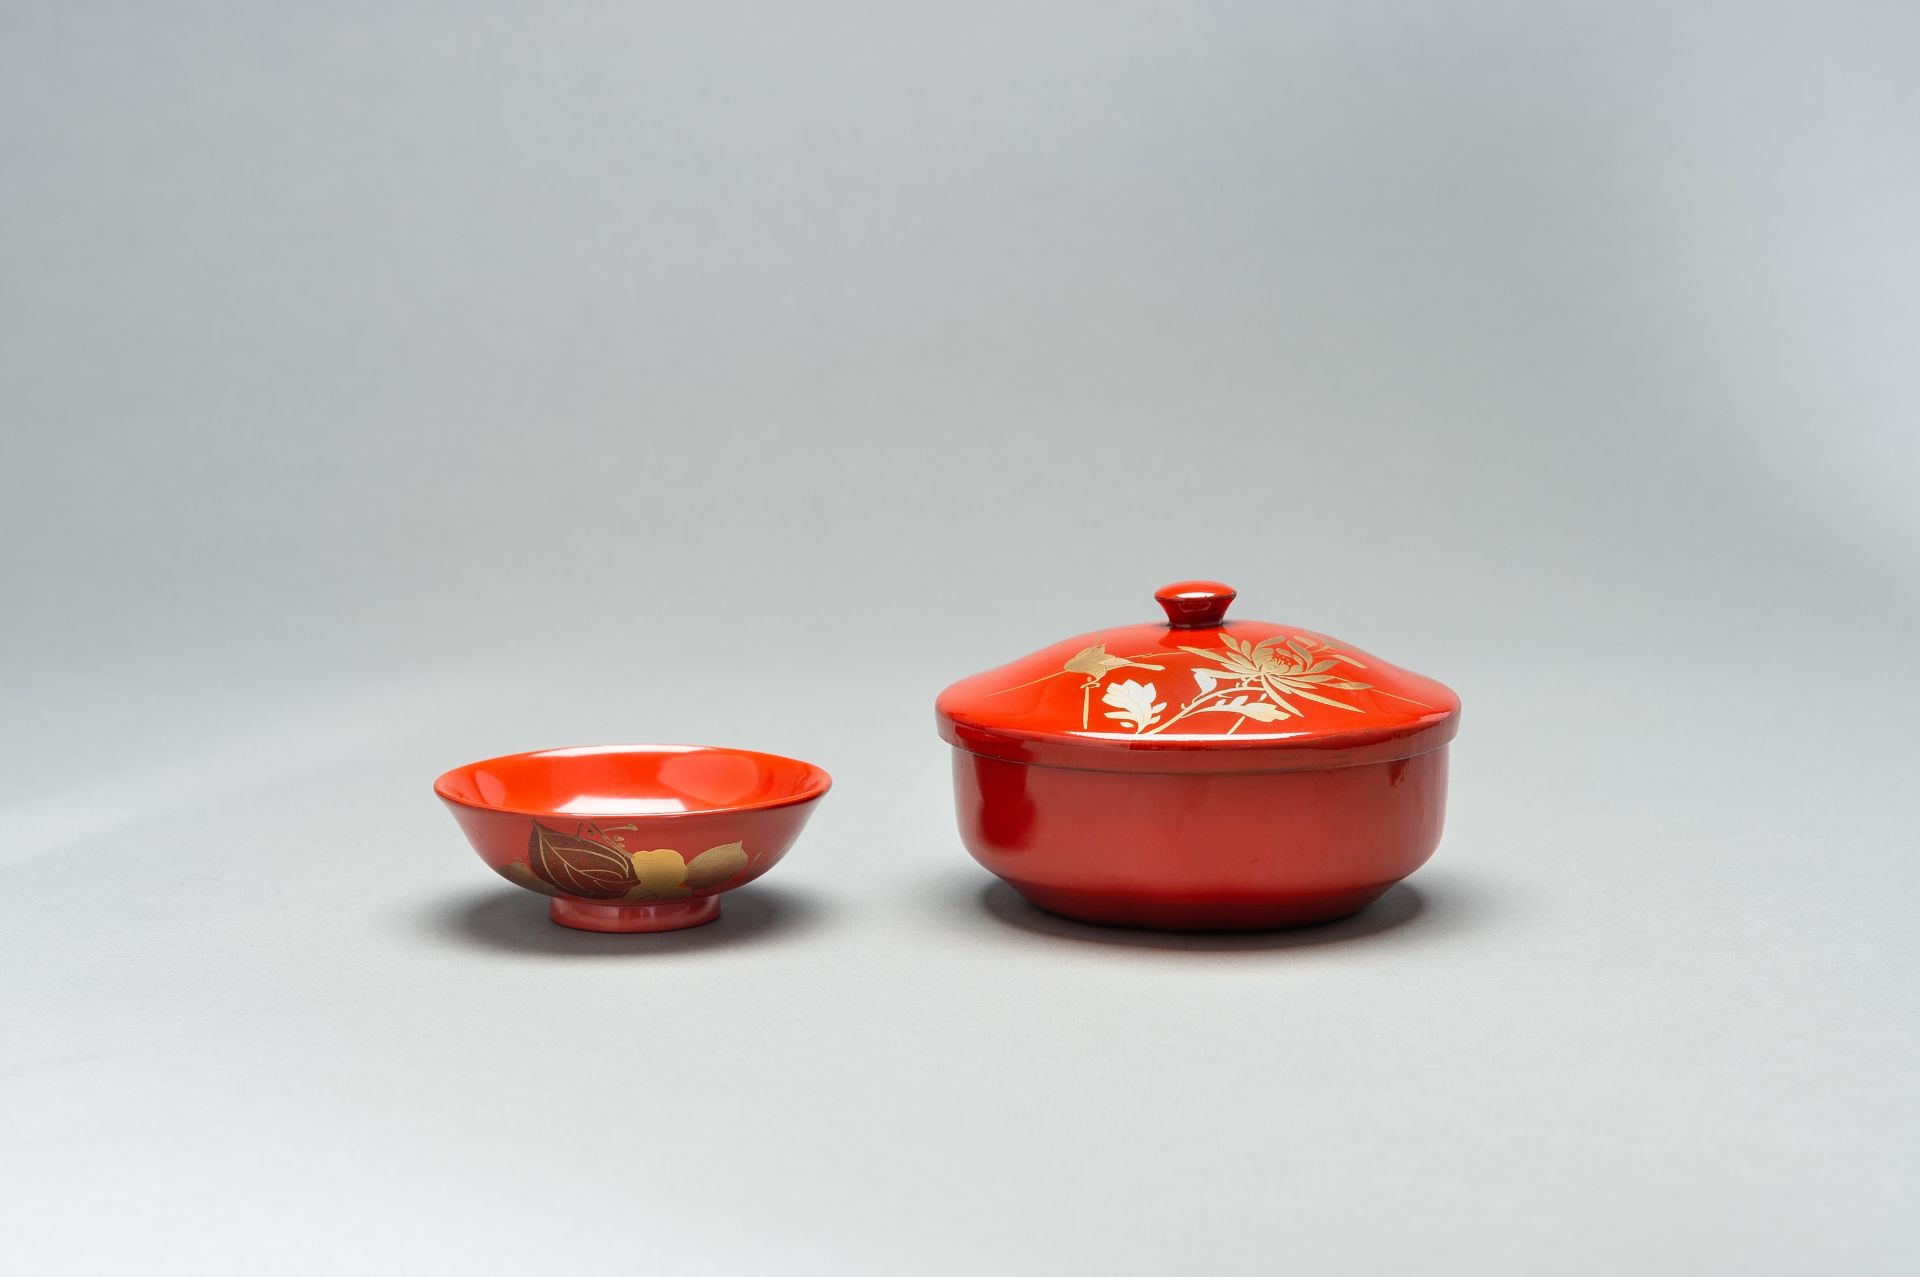 A RED LACQUER NIMONO WAN (BOWL WITH COVER) AND A SMALL KOBACHI (DISH) - Image 8 of 11